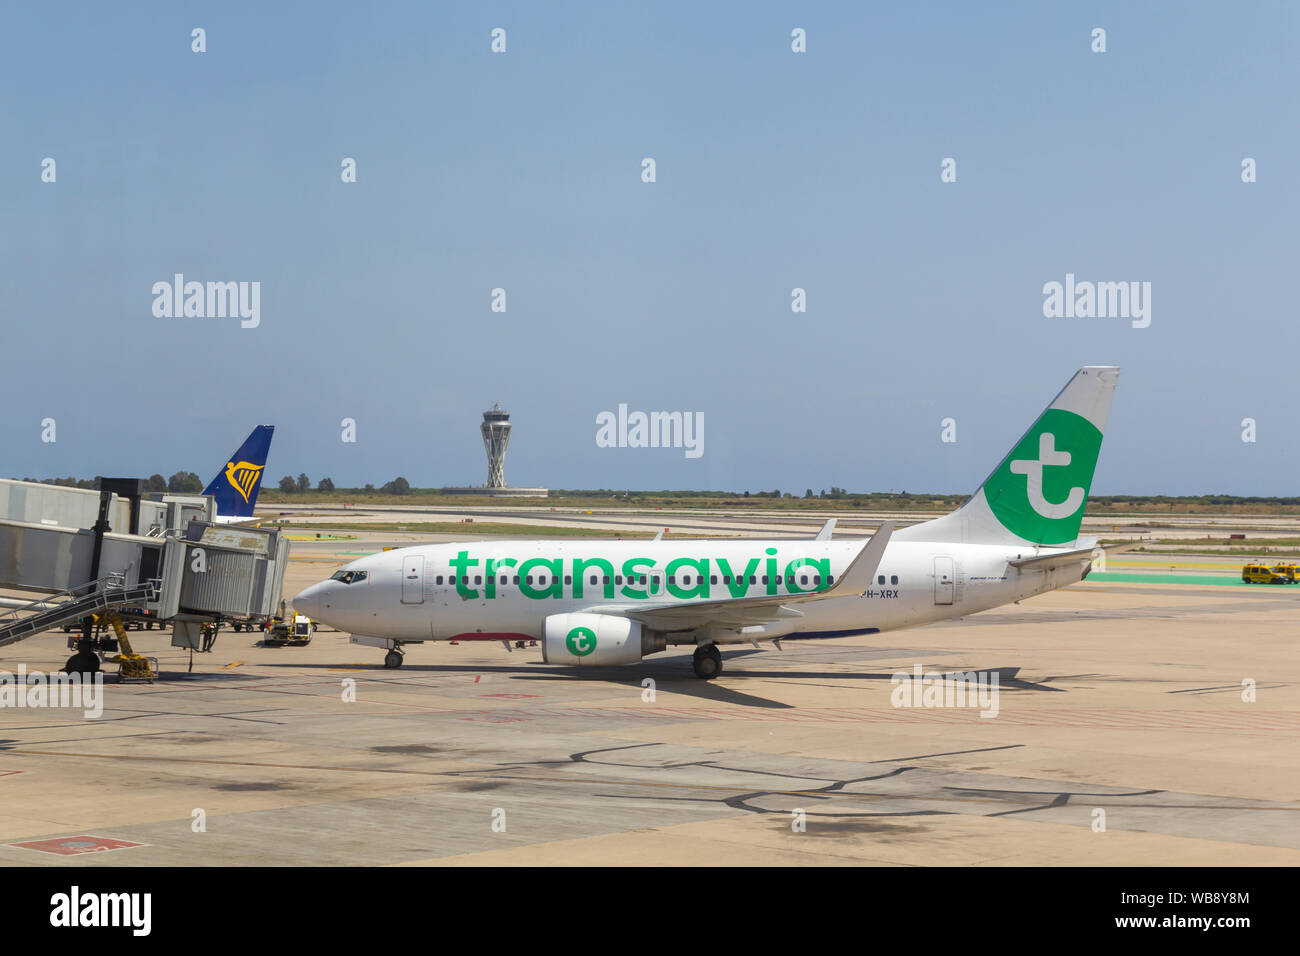 Barcelona, Spain - Agust 11, 2019: Boeing 737-700 airplane in the airport of Barcelona, from Transavia low cost company Stock Photo